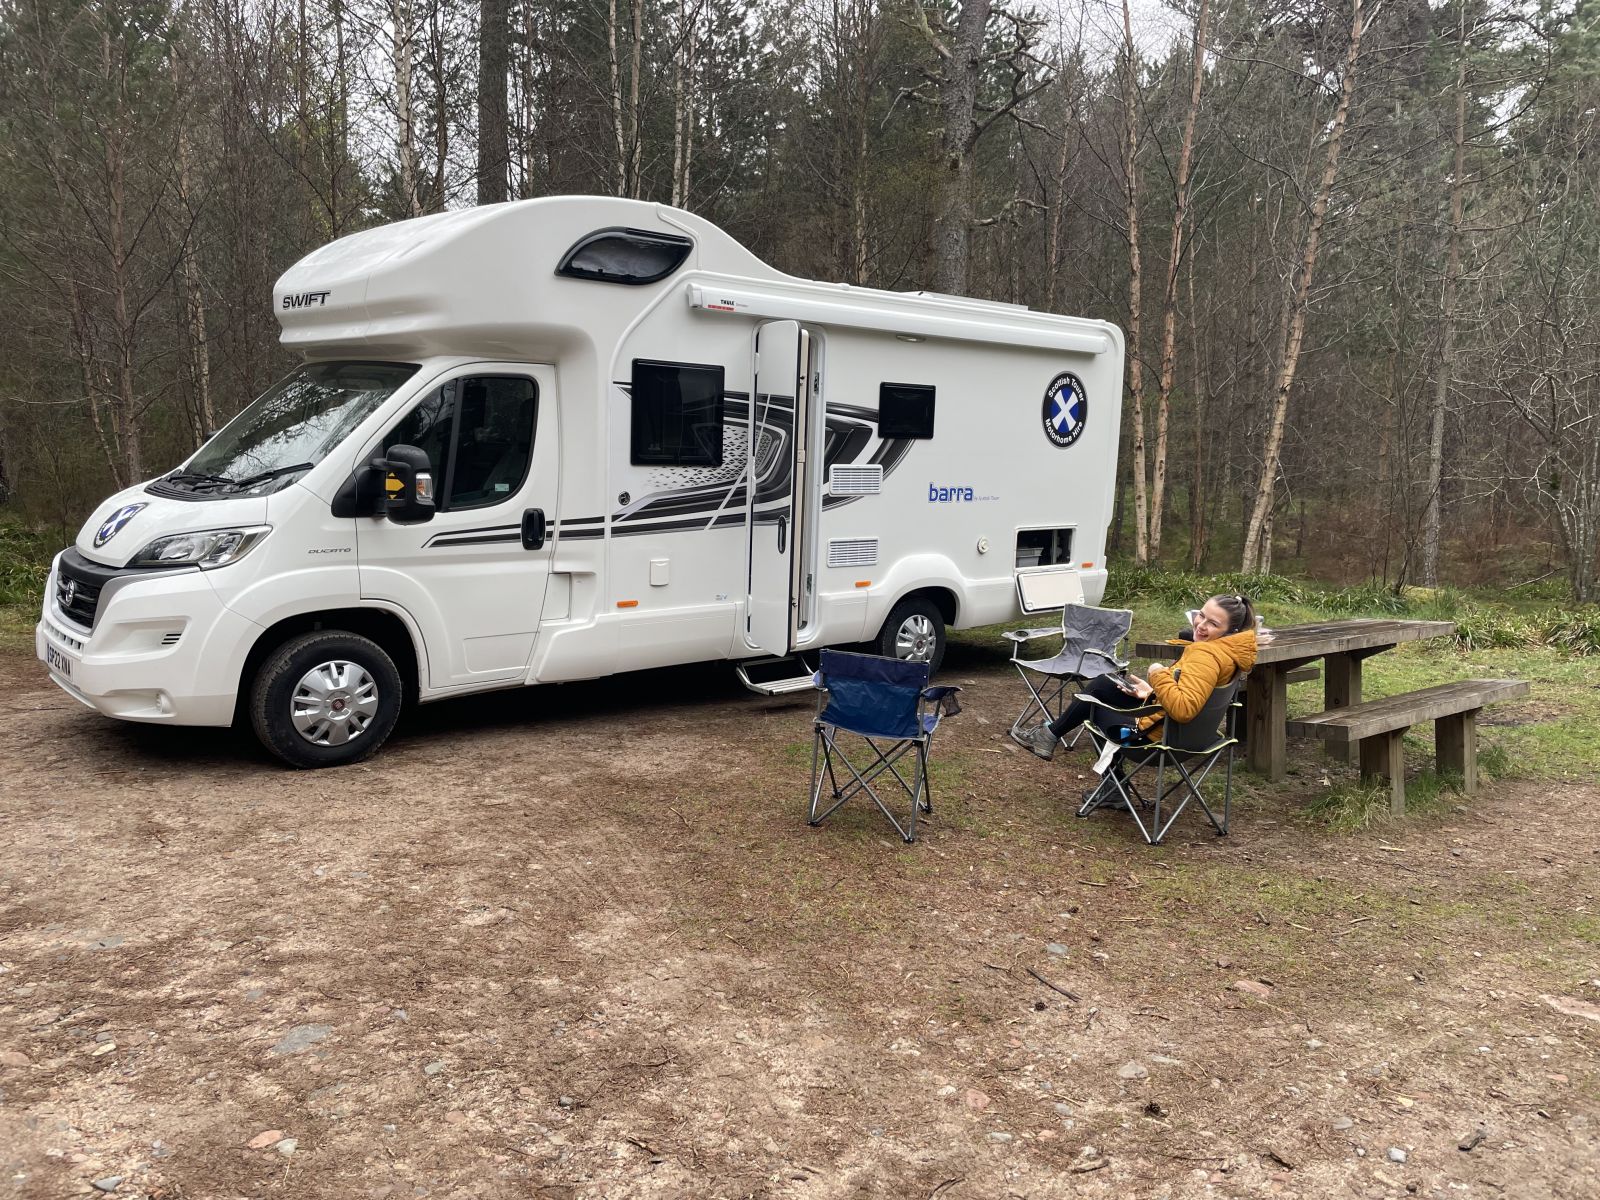 Motorhome parked in forest